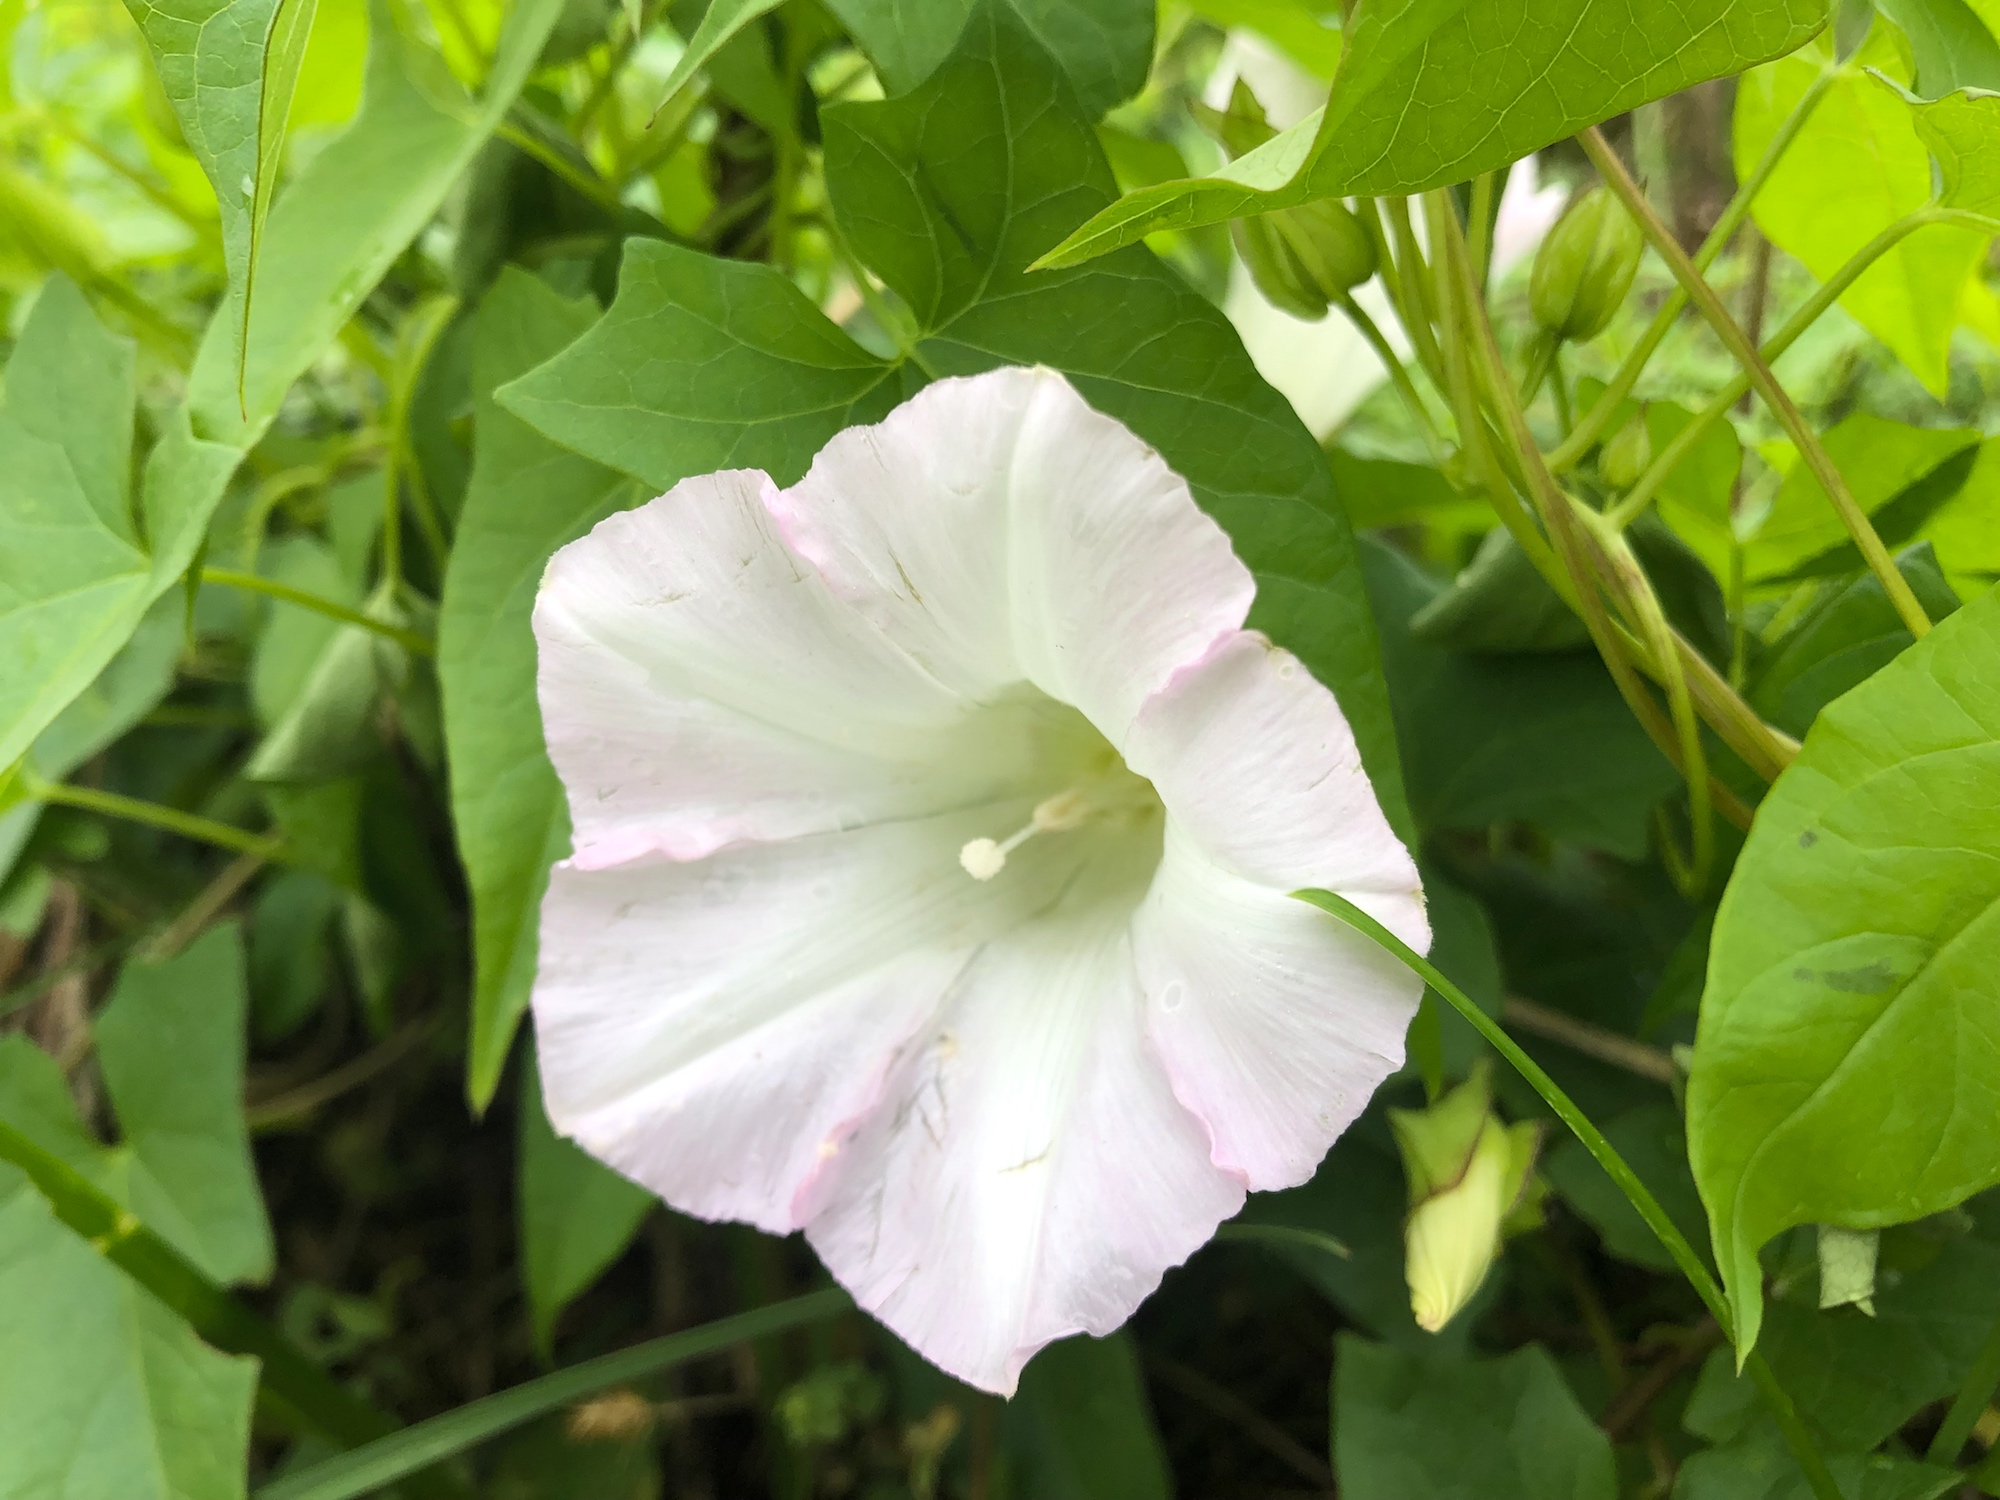 Hedge Bindweed on shore of Marion Dunn Pond in Madison, Wisconsin on August 6, 2020.